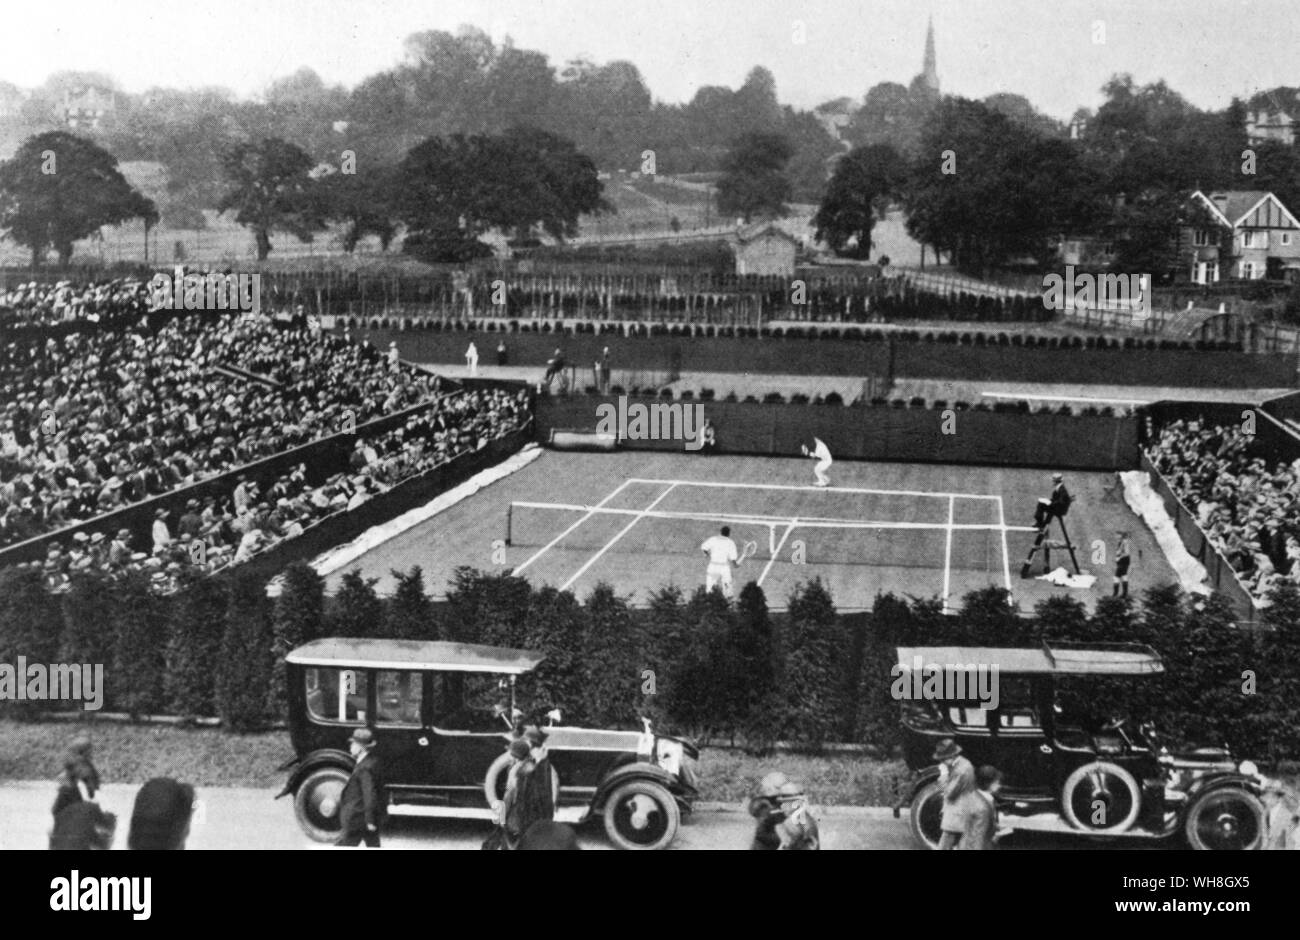 Wimbledon No 2 Court at the new Wimbledon at Church Road in 1923.  S M Jacobs (India) vs V Richards (US)  The Encyclopedia of Tennis page 349. Stock Photo